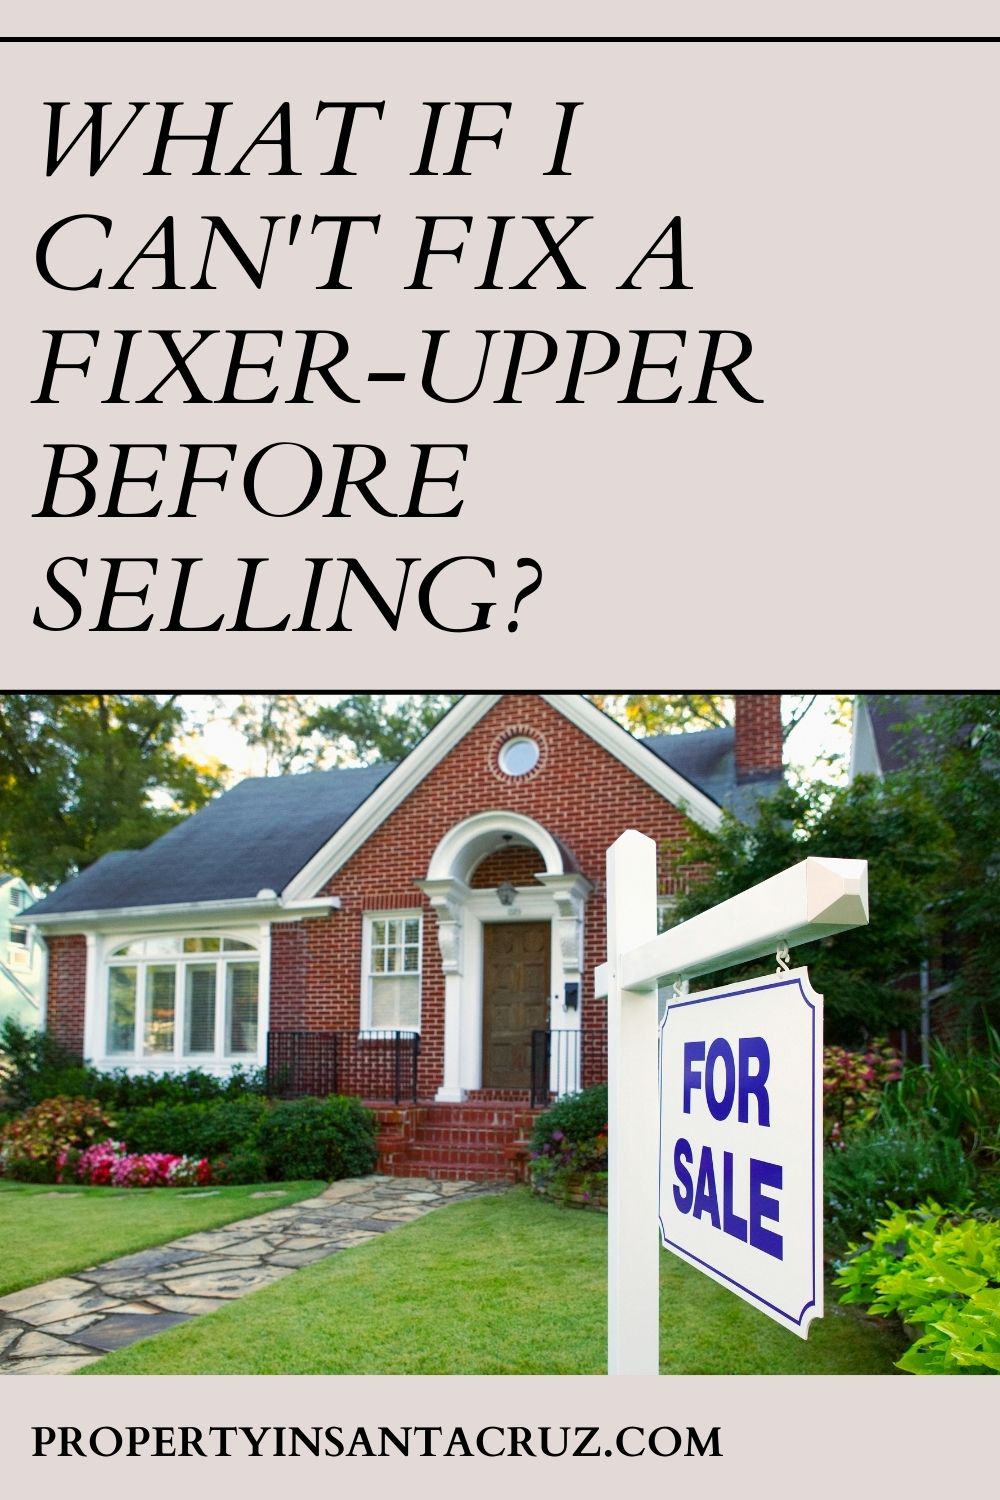 What if I Can't Fix a Fixer-Upper Before Selling